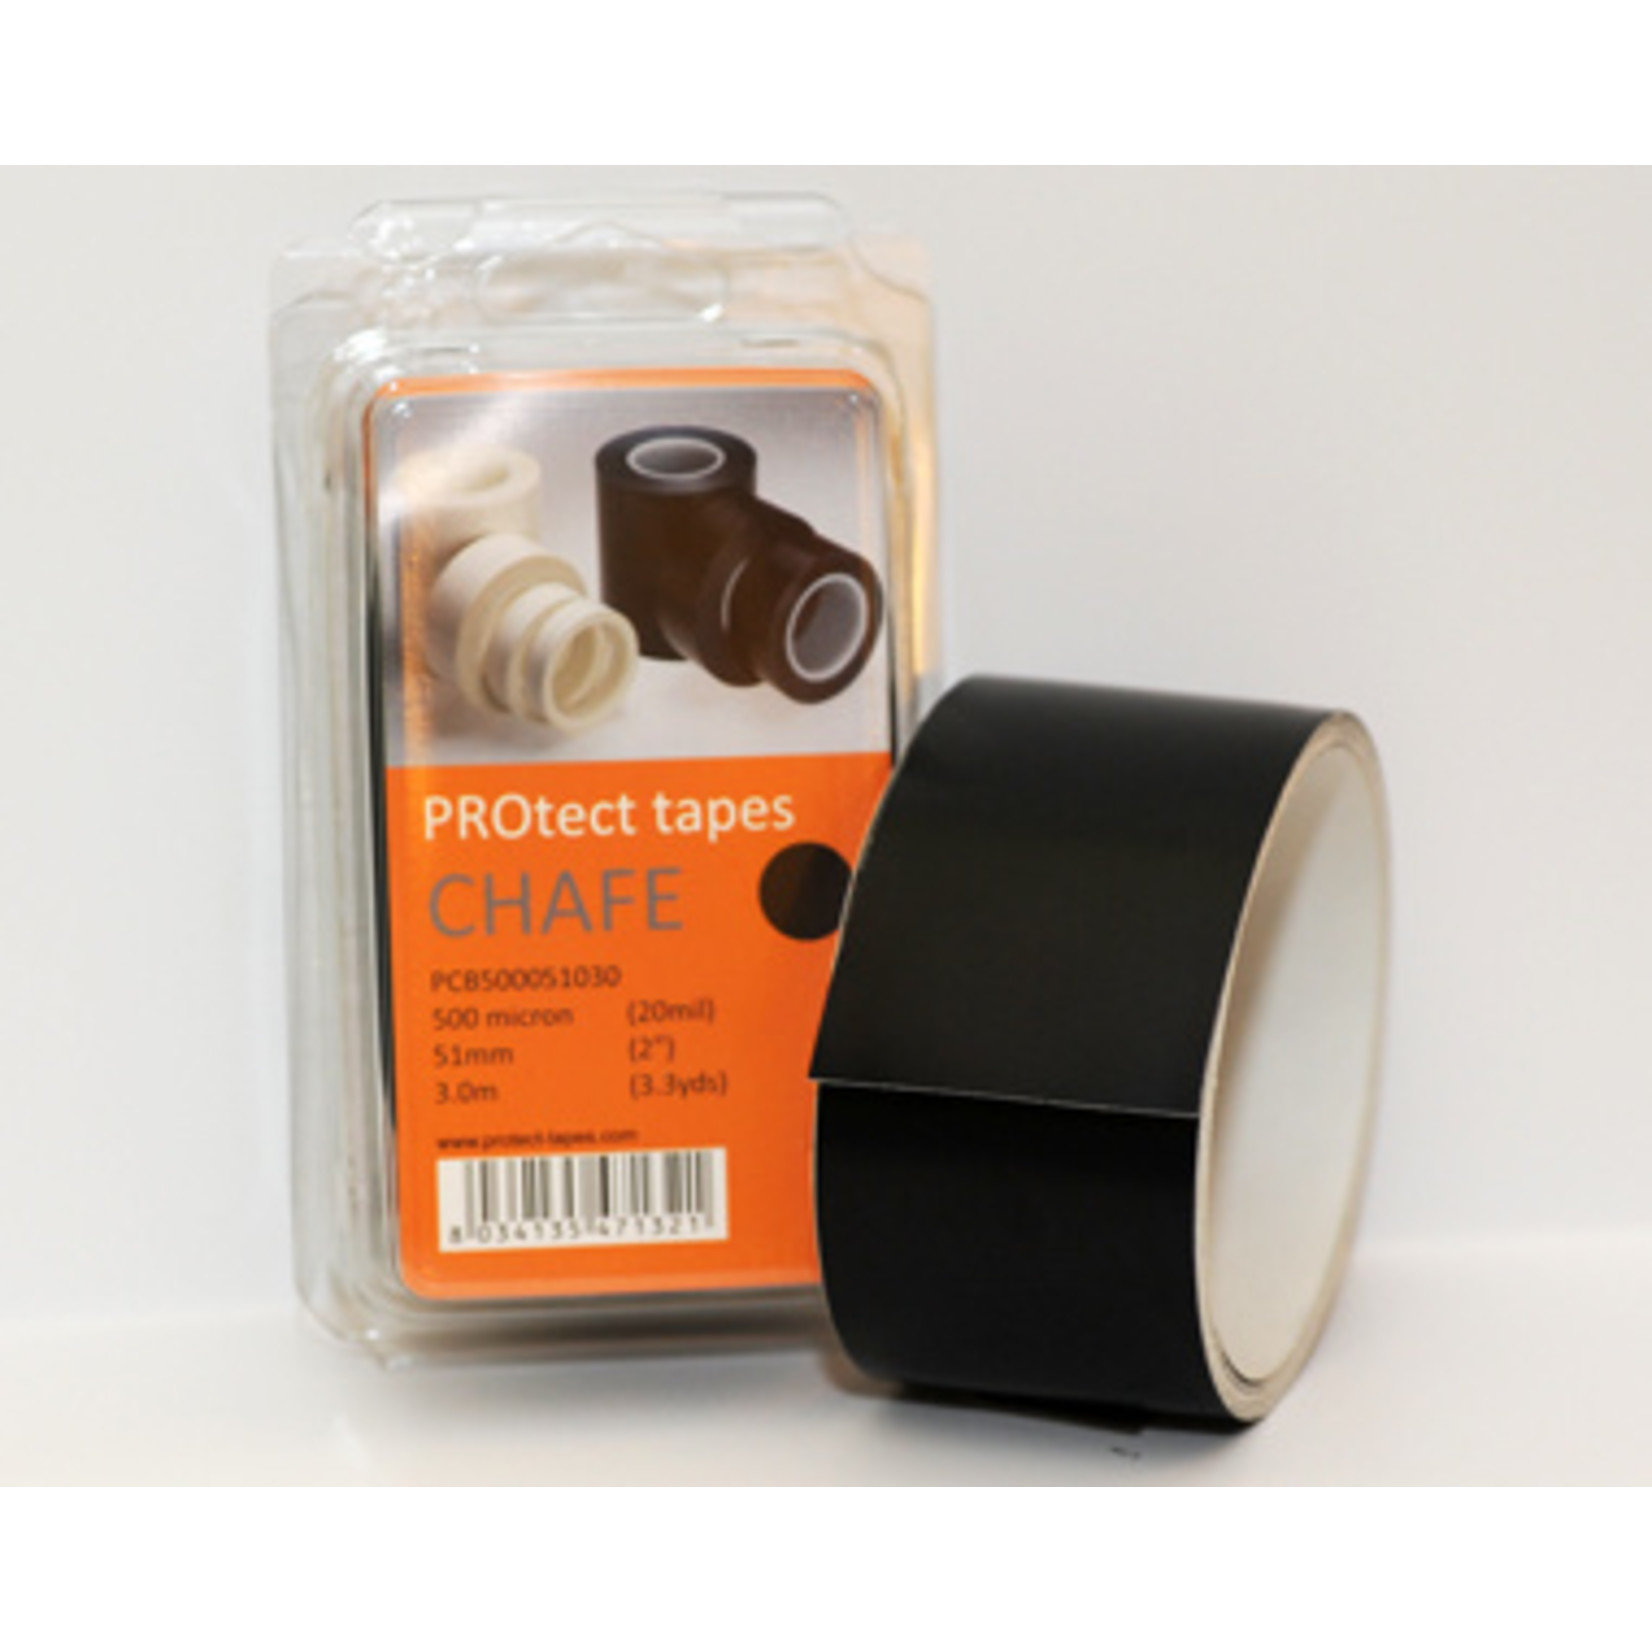 PROtect Tapes Chafe 500mic. black 51mm x 3m